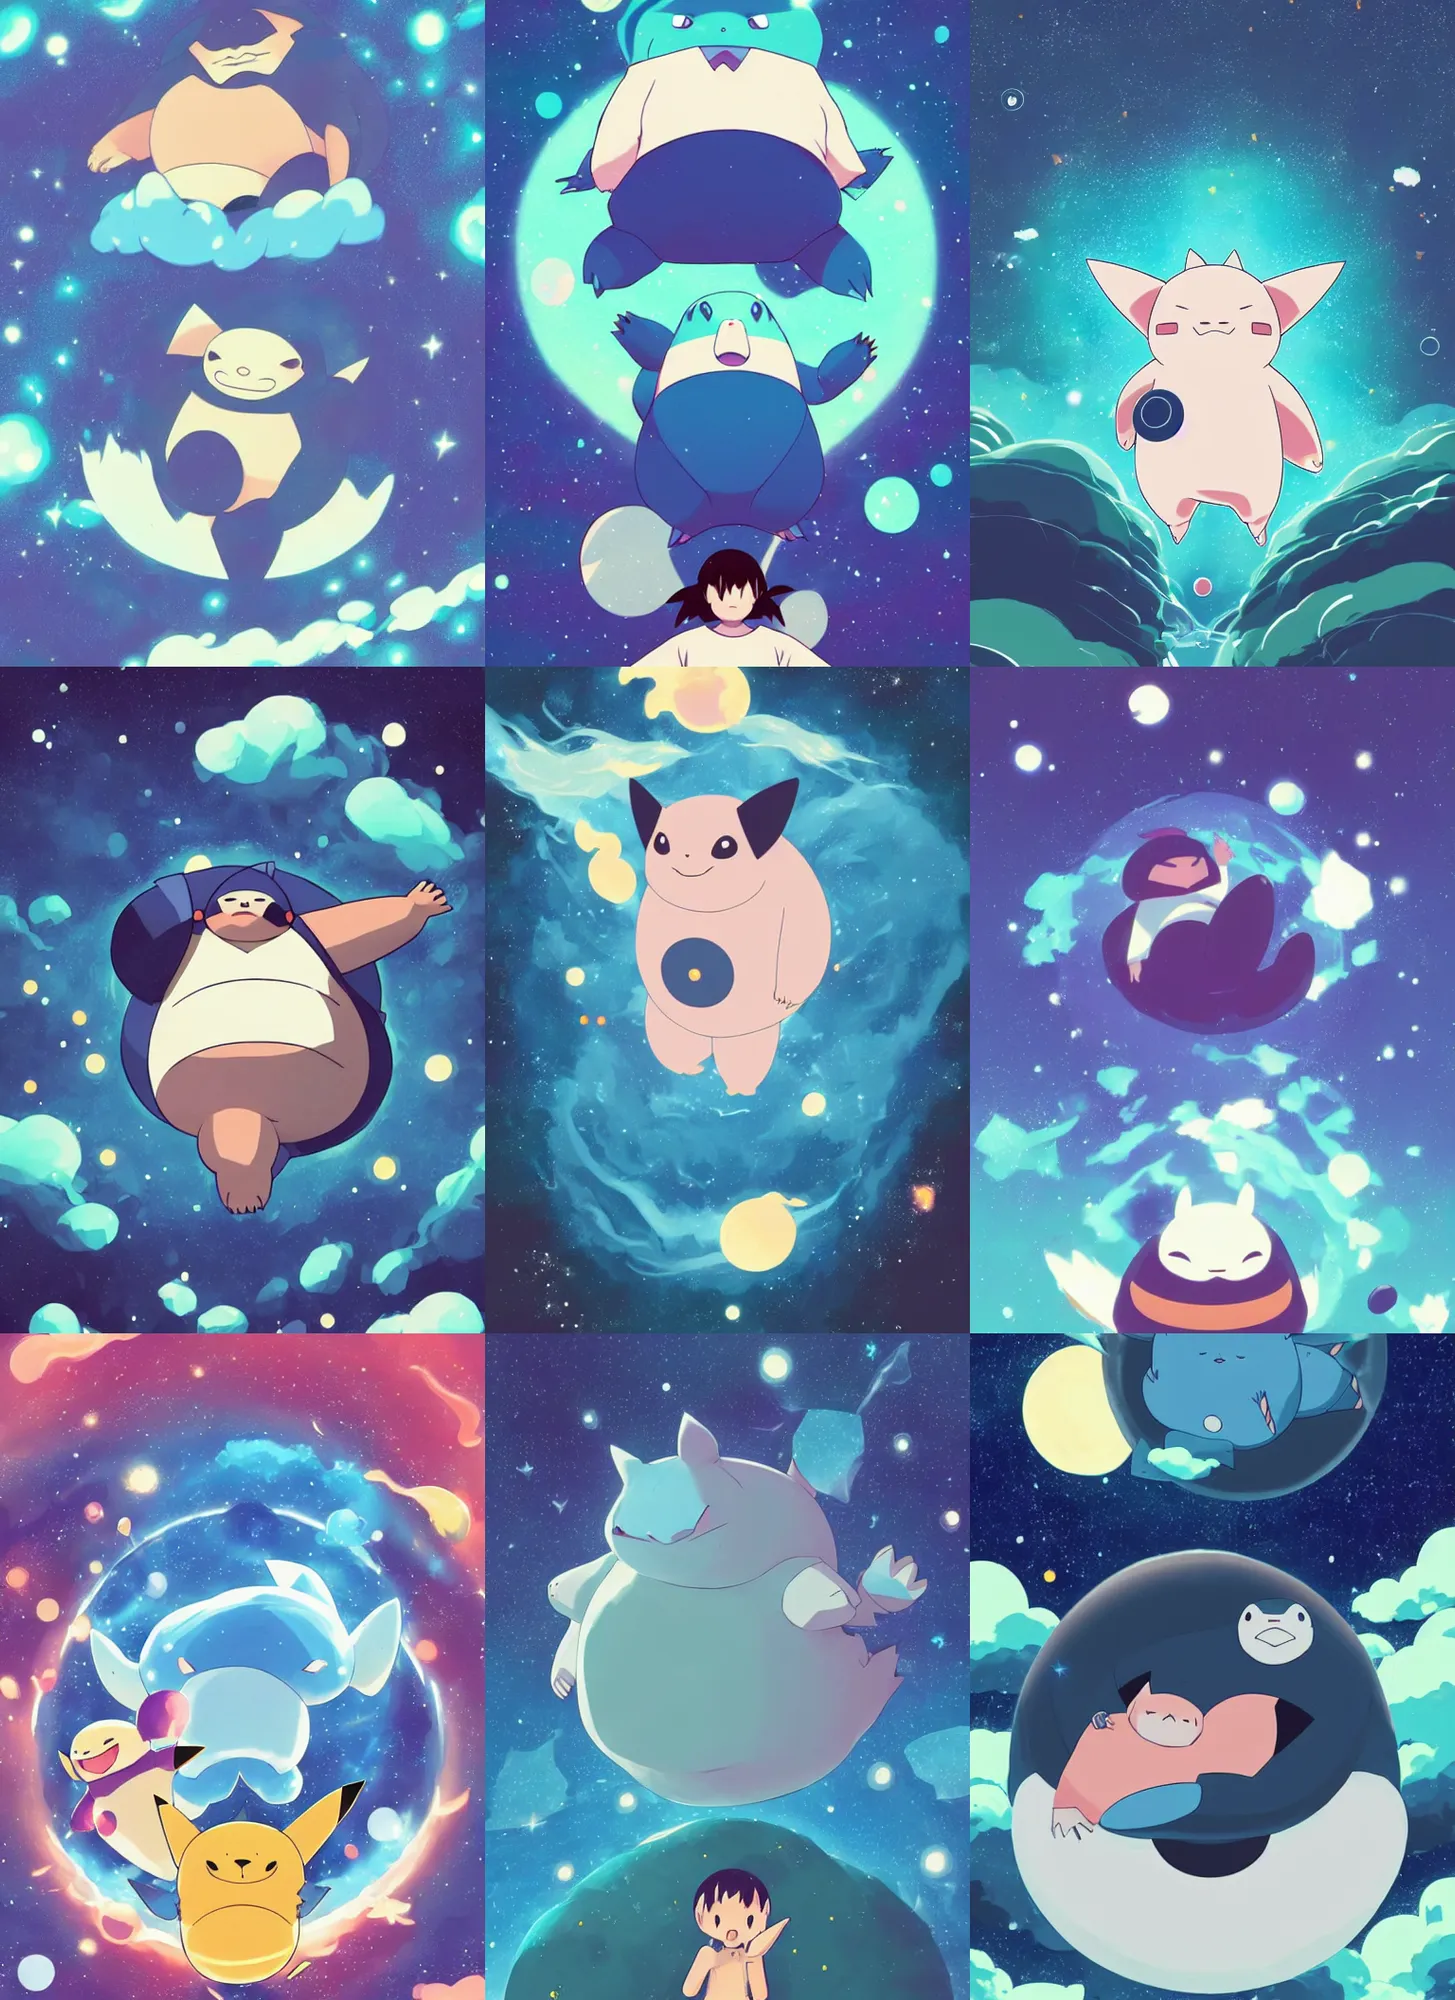 Prompt: the pokemon snorlax. he is floating in space. accurate depiction. background is a nebula. clean cel shaded vector art. shutterstock. behance hd by lois van baarle, artgerm, helen huang, by makoto shinkai and ilya kuvshinov, rossdraws, illustration, art by ilya kuvshinov